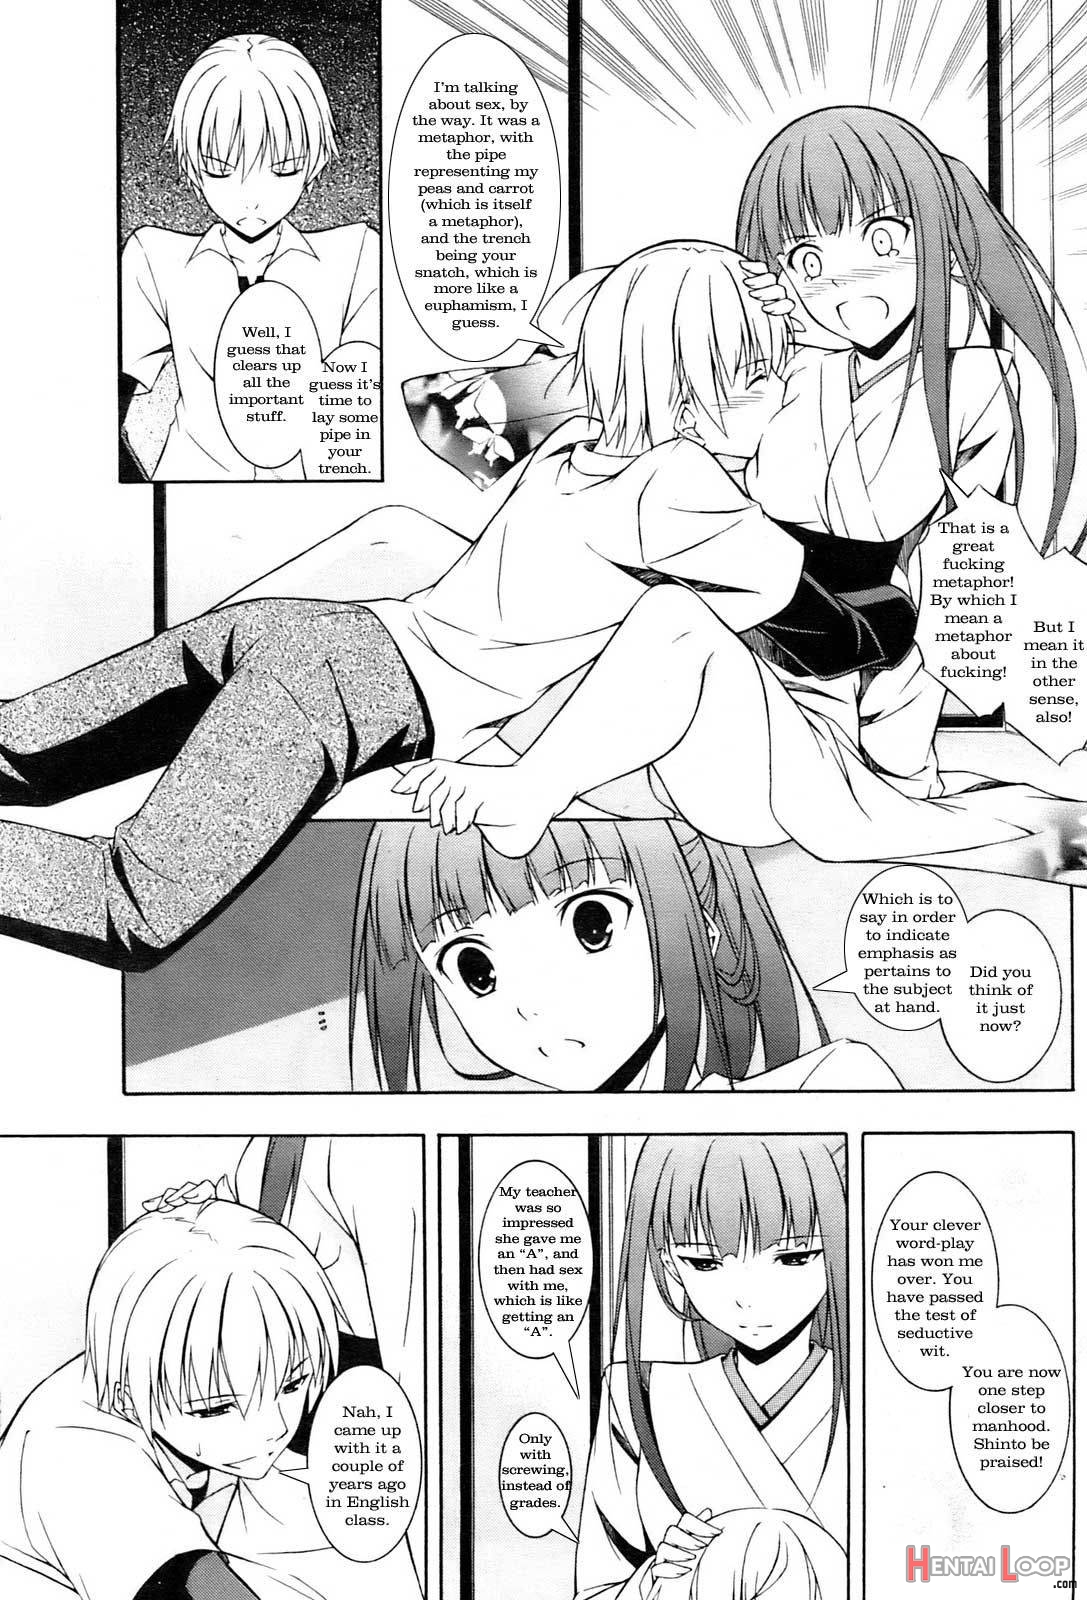 Crazy Shinto Bitches in the Mood page 6